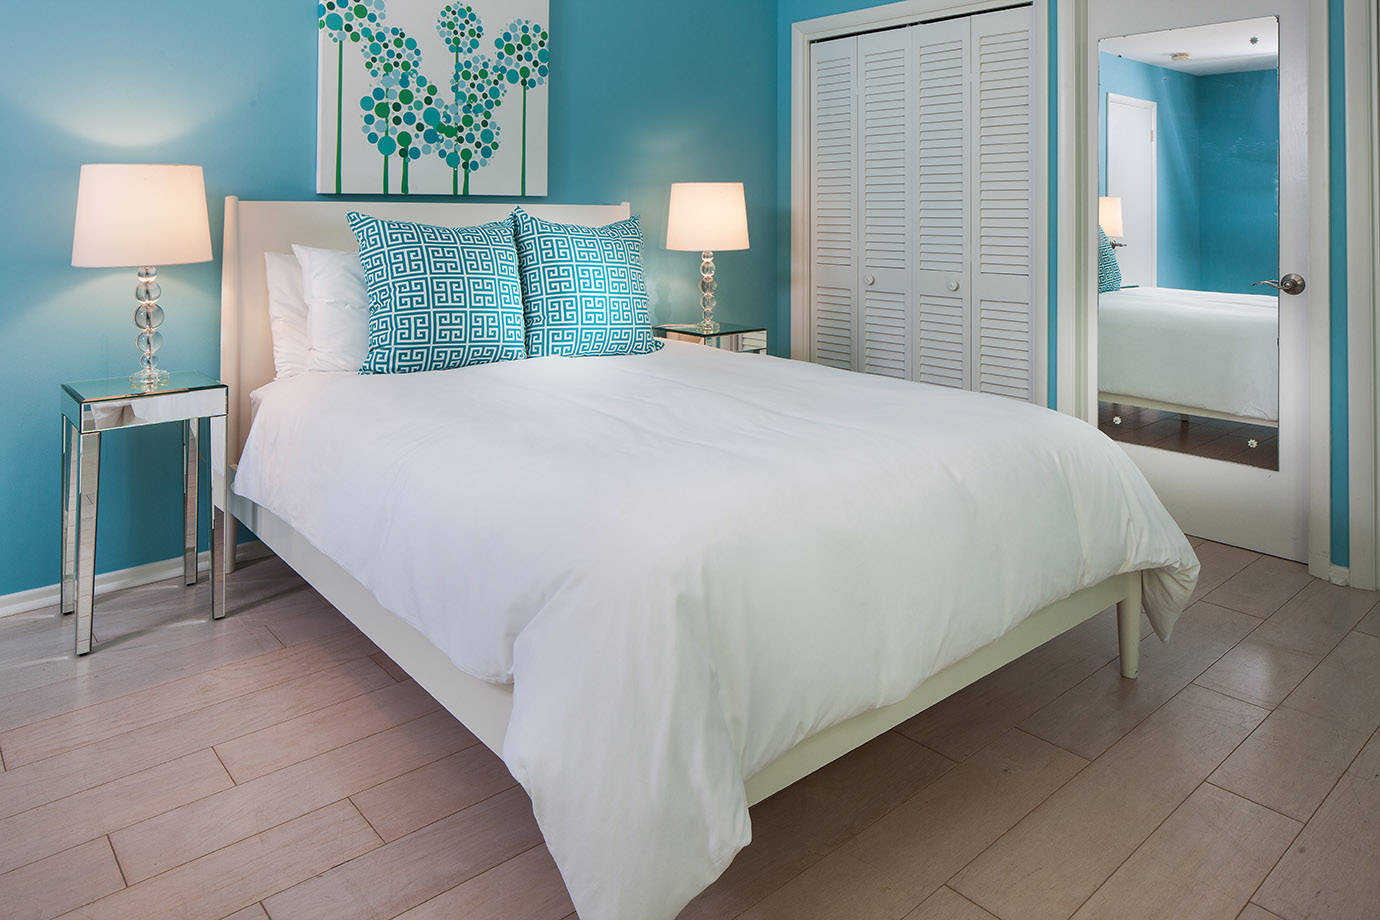 Guest room in the Sea Oats Estate with bright blue walls, a white bed frame, white bedding and pillows, two bright blue decorative pillows, glass nightstands with lamps and a closet with a mirror